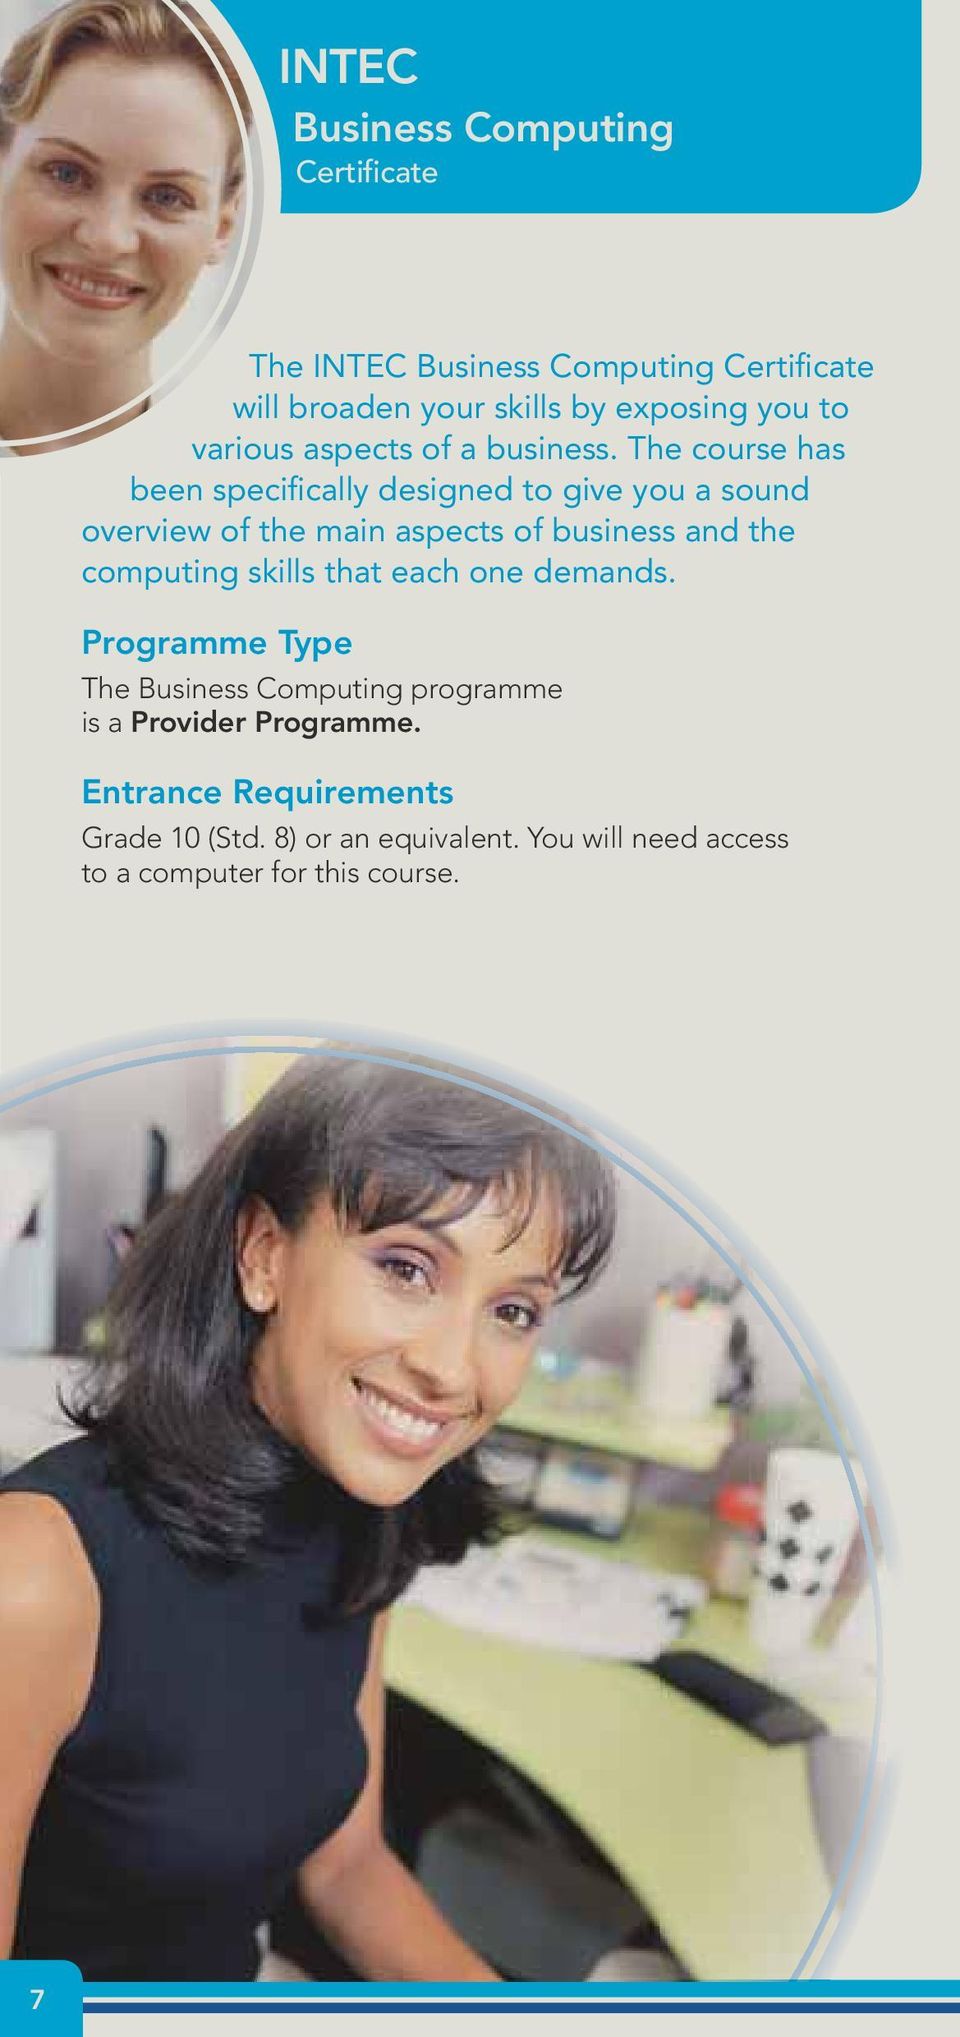 The course has been specifically designed to give you a sound overview of the main aspects of business and the computing